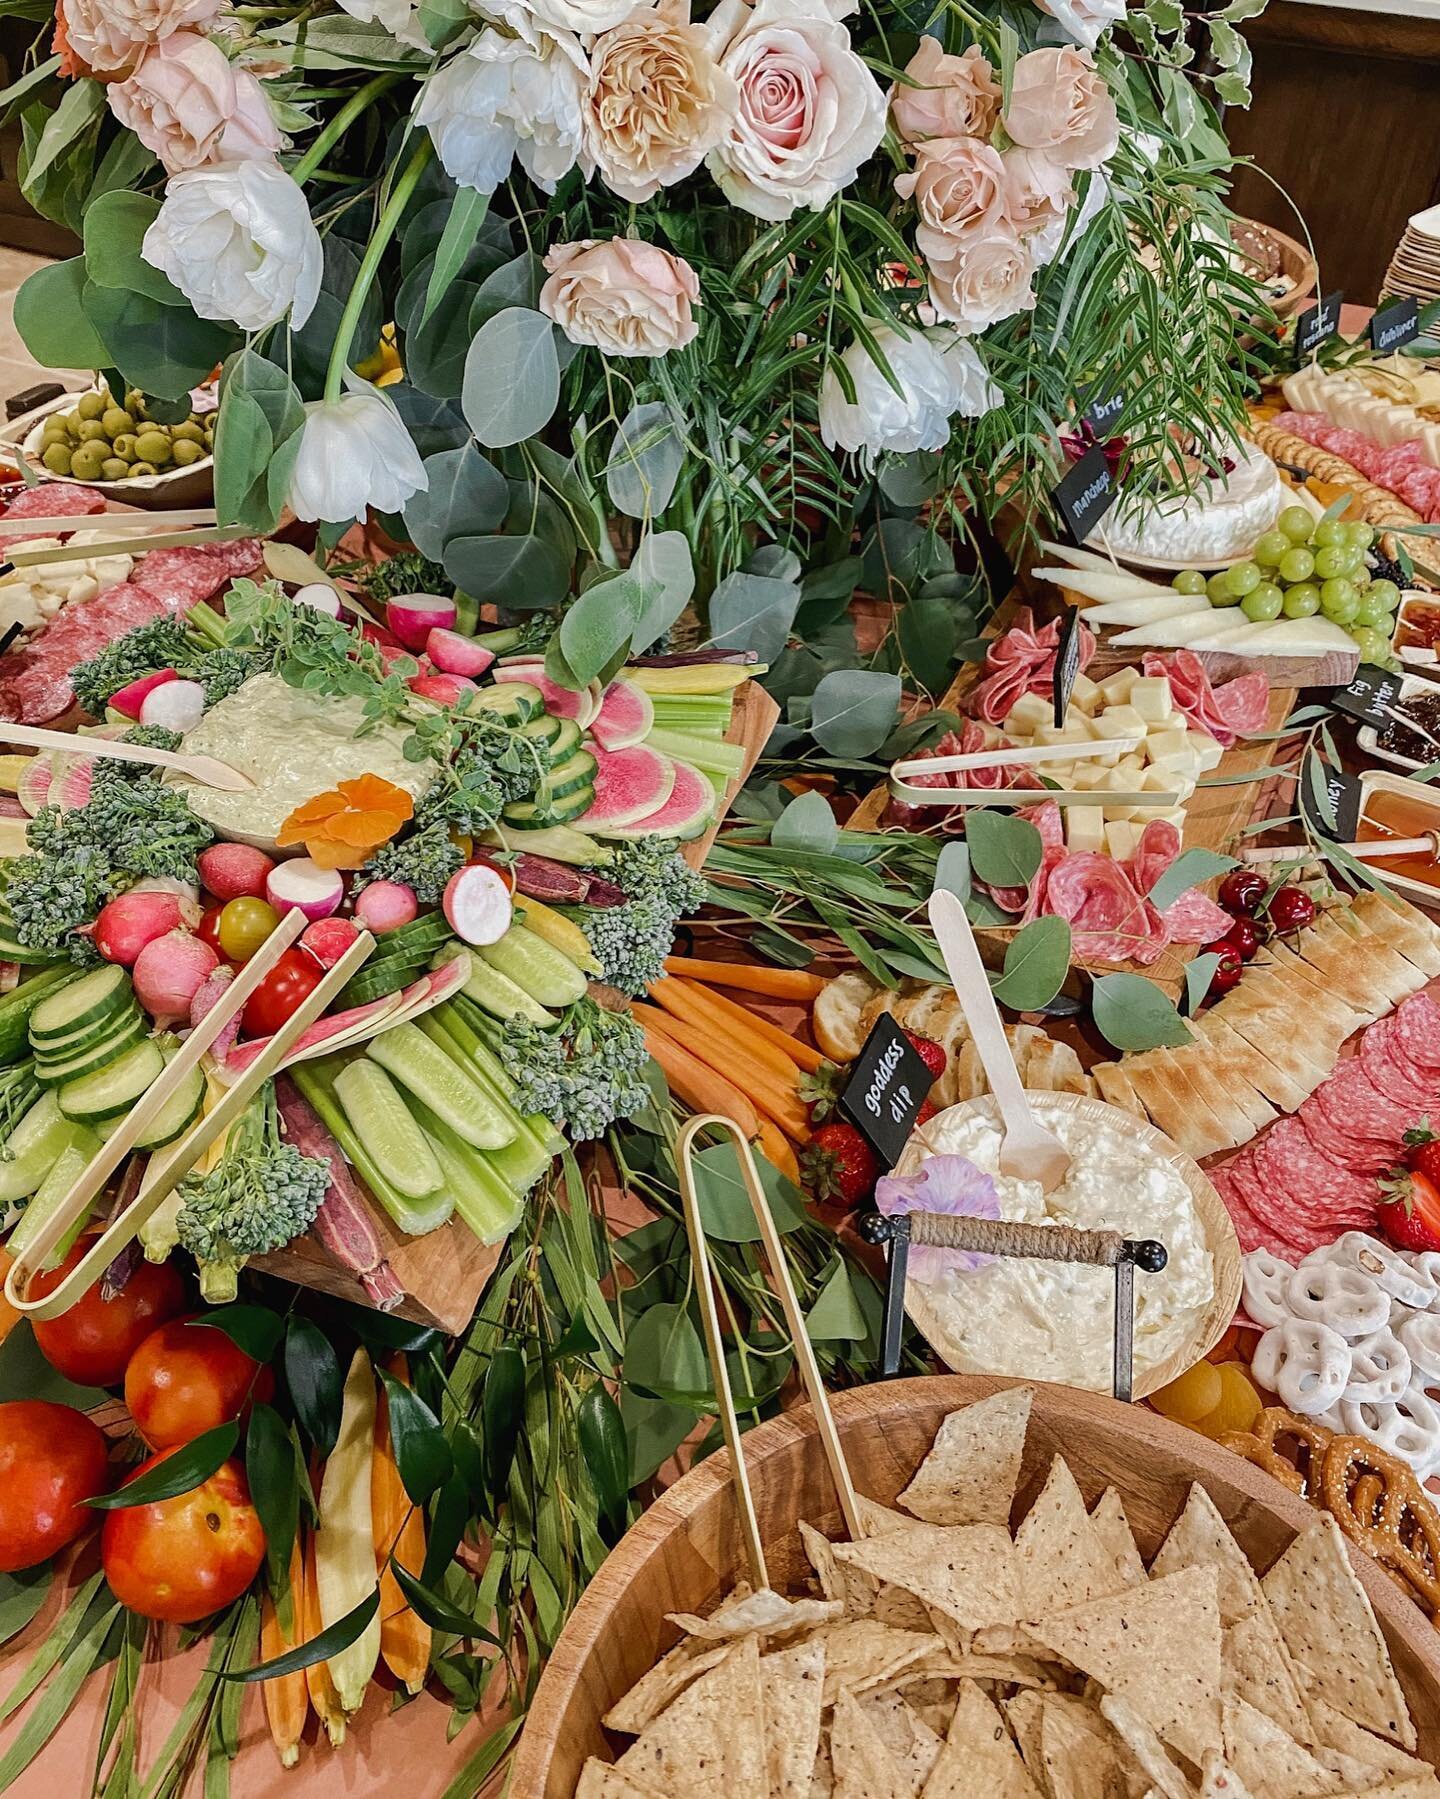 Corner glimpse of a 360 grazing table 🥰

This one was for just 30 people so we filled the table with props, greenery, and extra fillers ❤️❤️❤️
.
.
.
.
#Grazing #grazingboard #grazingtables #grazingbox #grazingtable #charcuterie #losangelescatering #